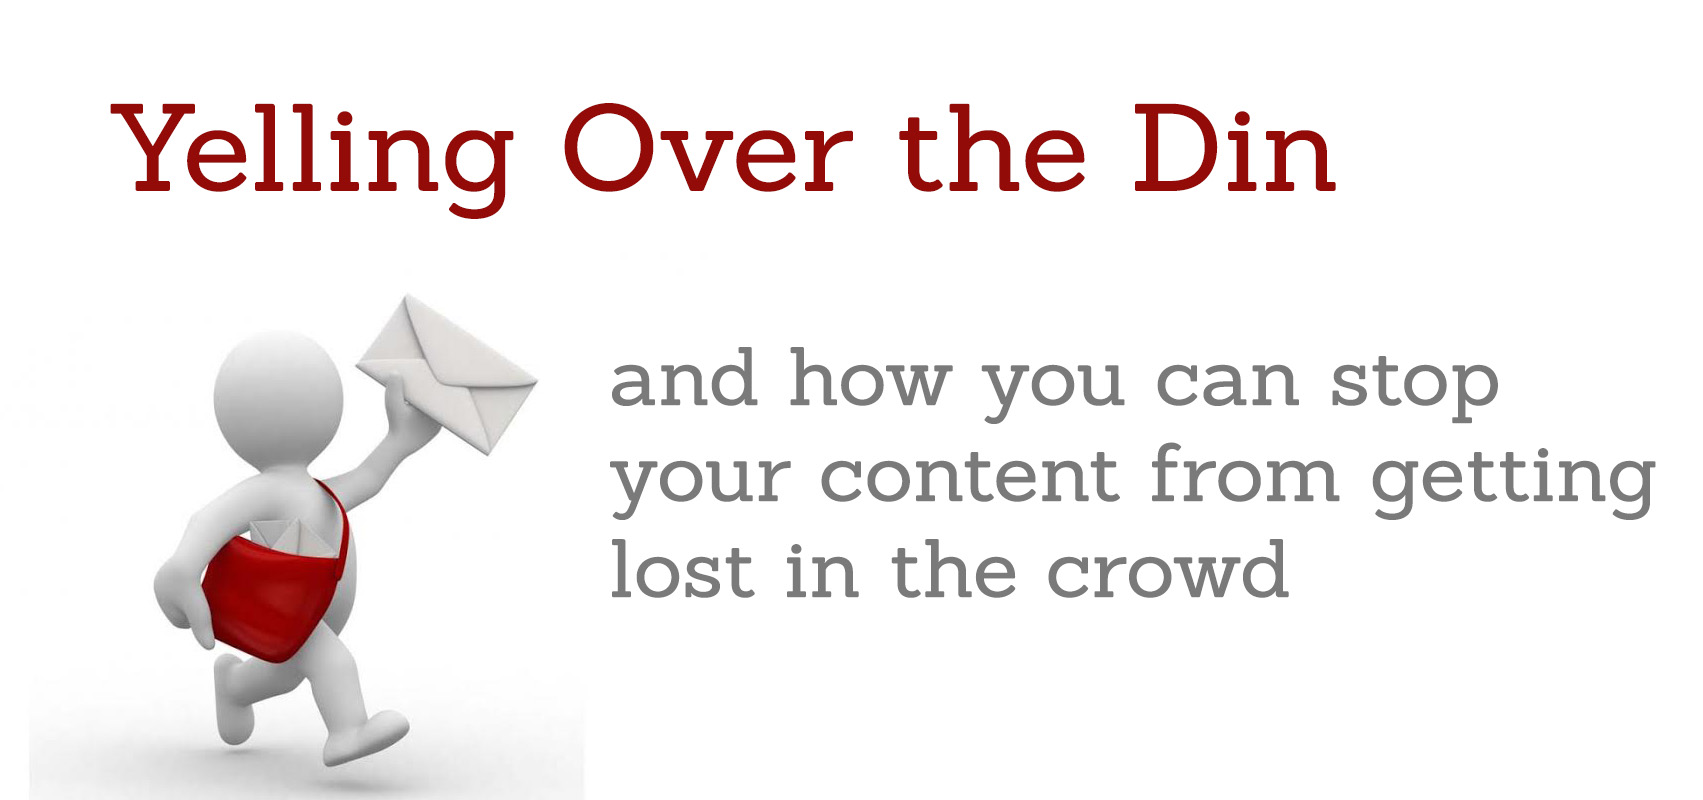 It's noisy out there in the content marketing world—make sure your content doesn't get lost.